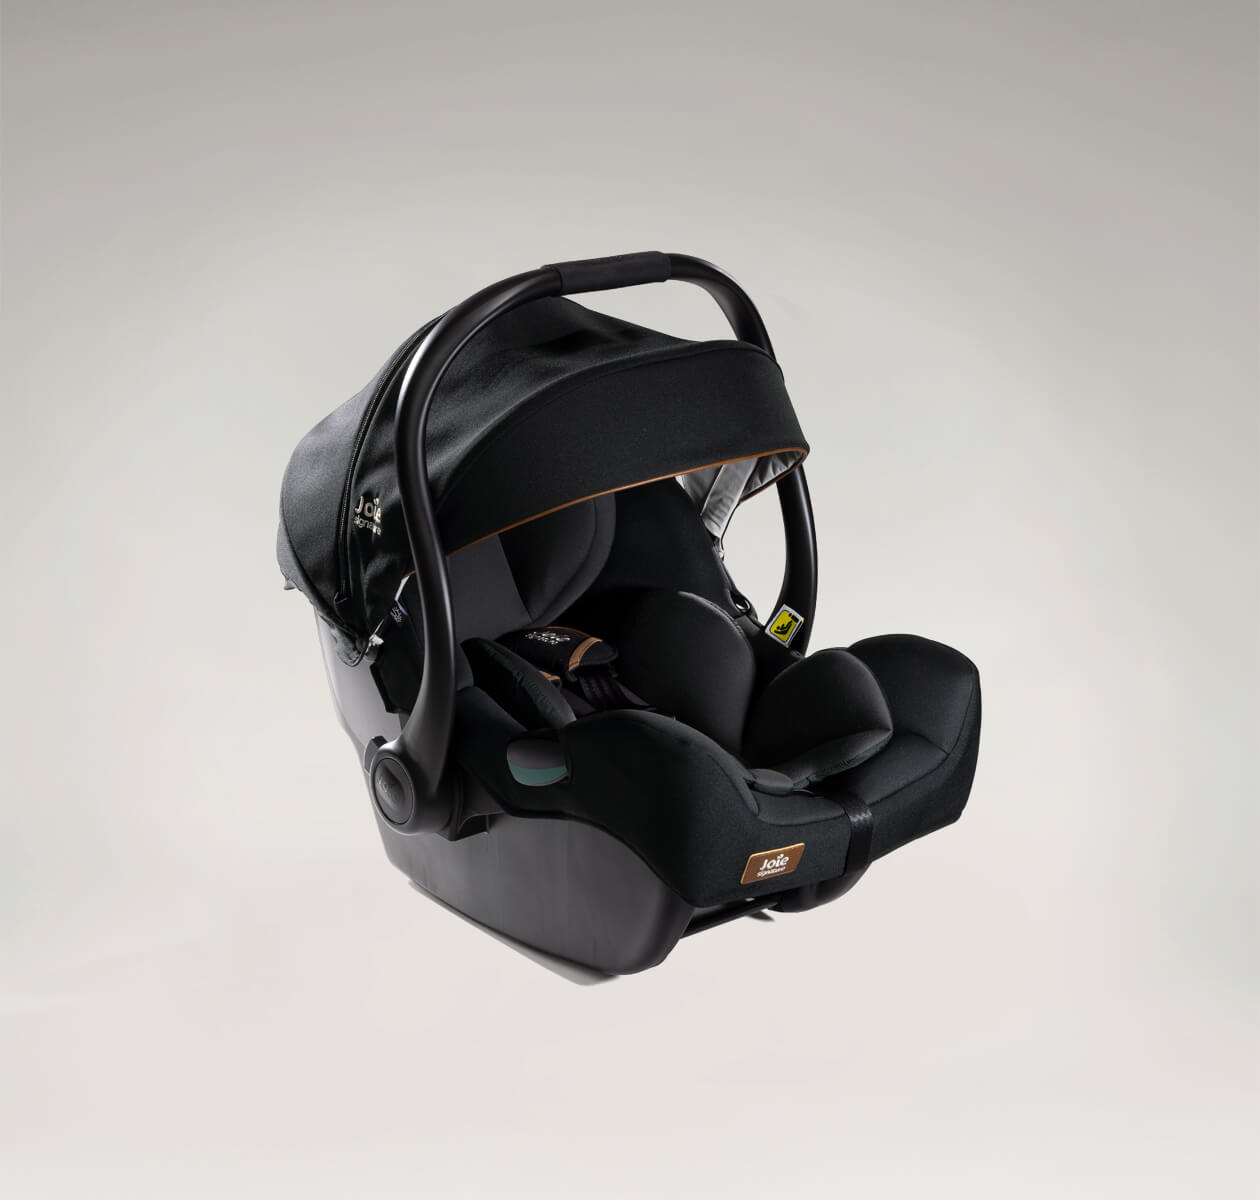 A black Joie i-Jemini infant car seat at an angle facing to the right